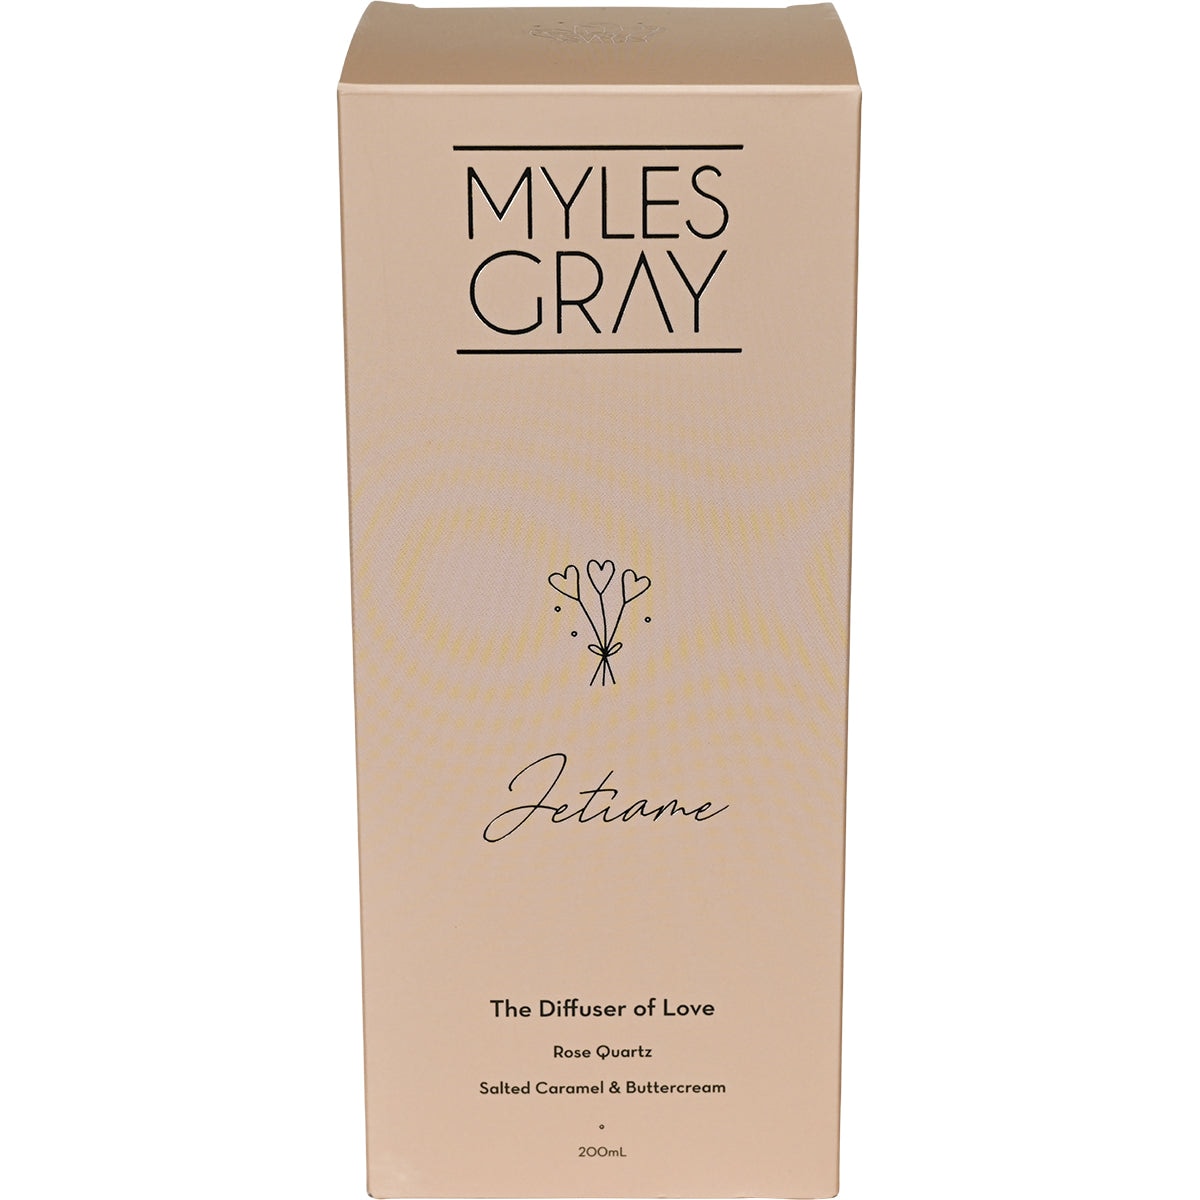 Myles Gray Crystal Infused Reed Diffuser Salted Caramel & Buttercream 200ml